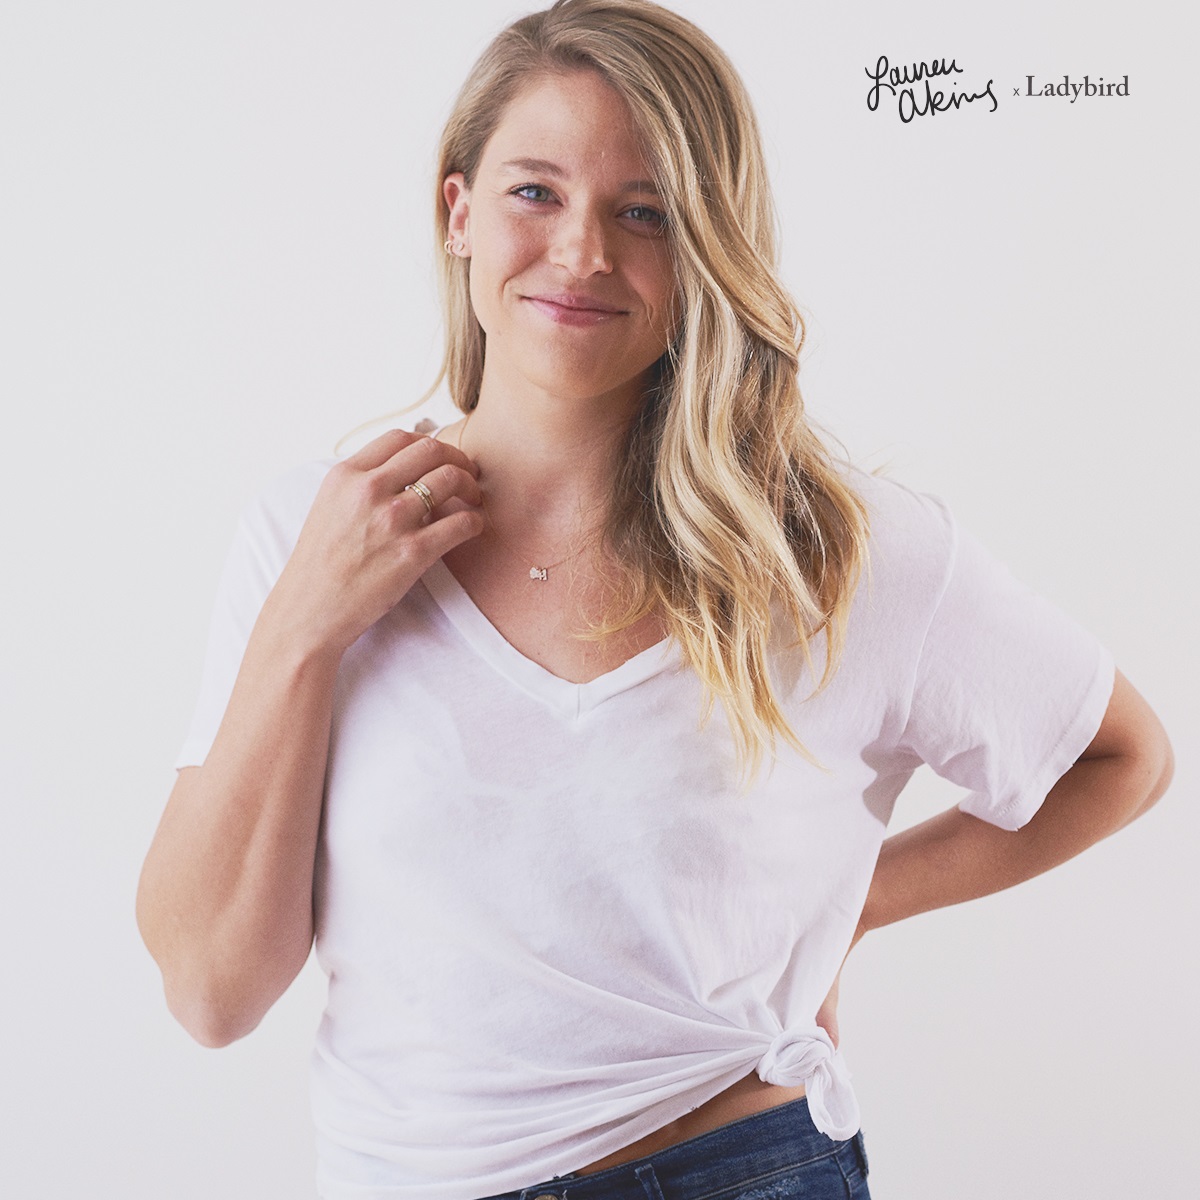 Lauren Akins Teams Up with Ladybird to Design Jewelry Line for Charity